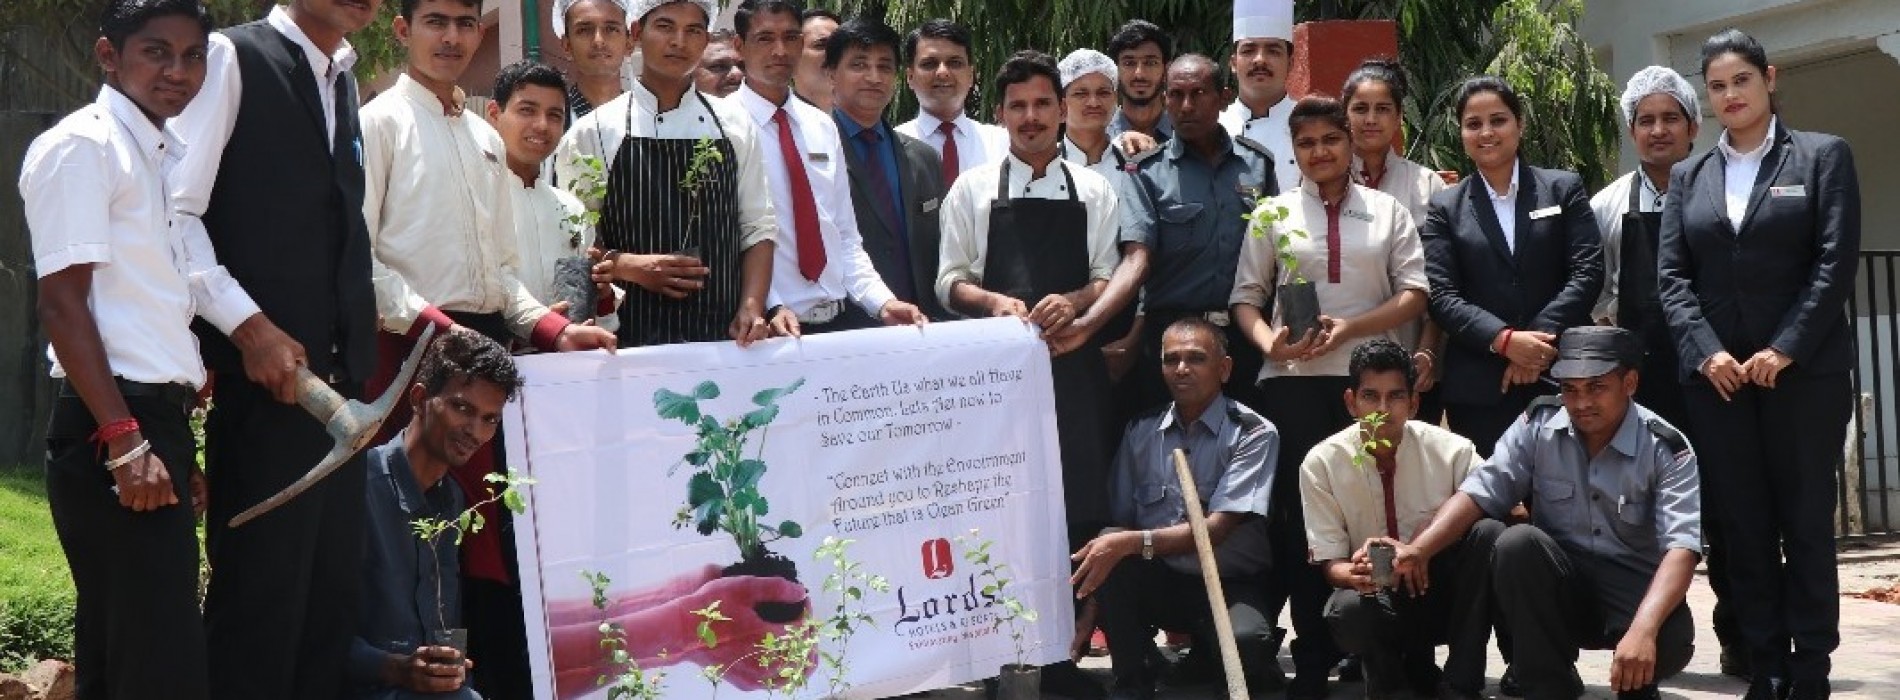 Lords Inn – Vadodara pledges to save the earth on World Environment Day